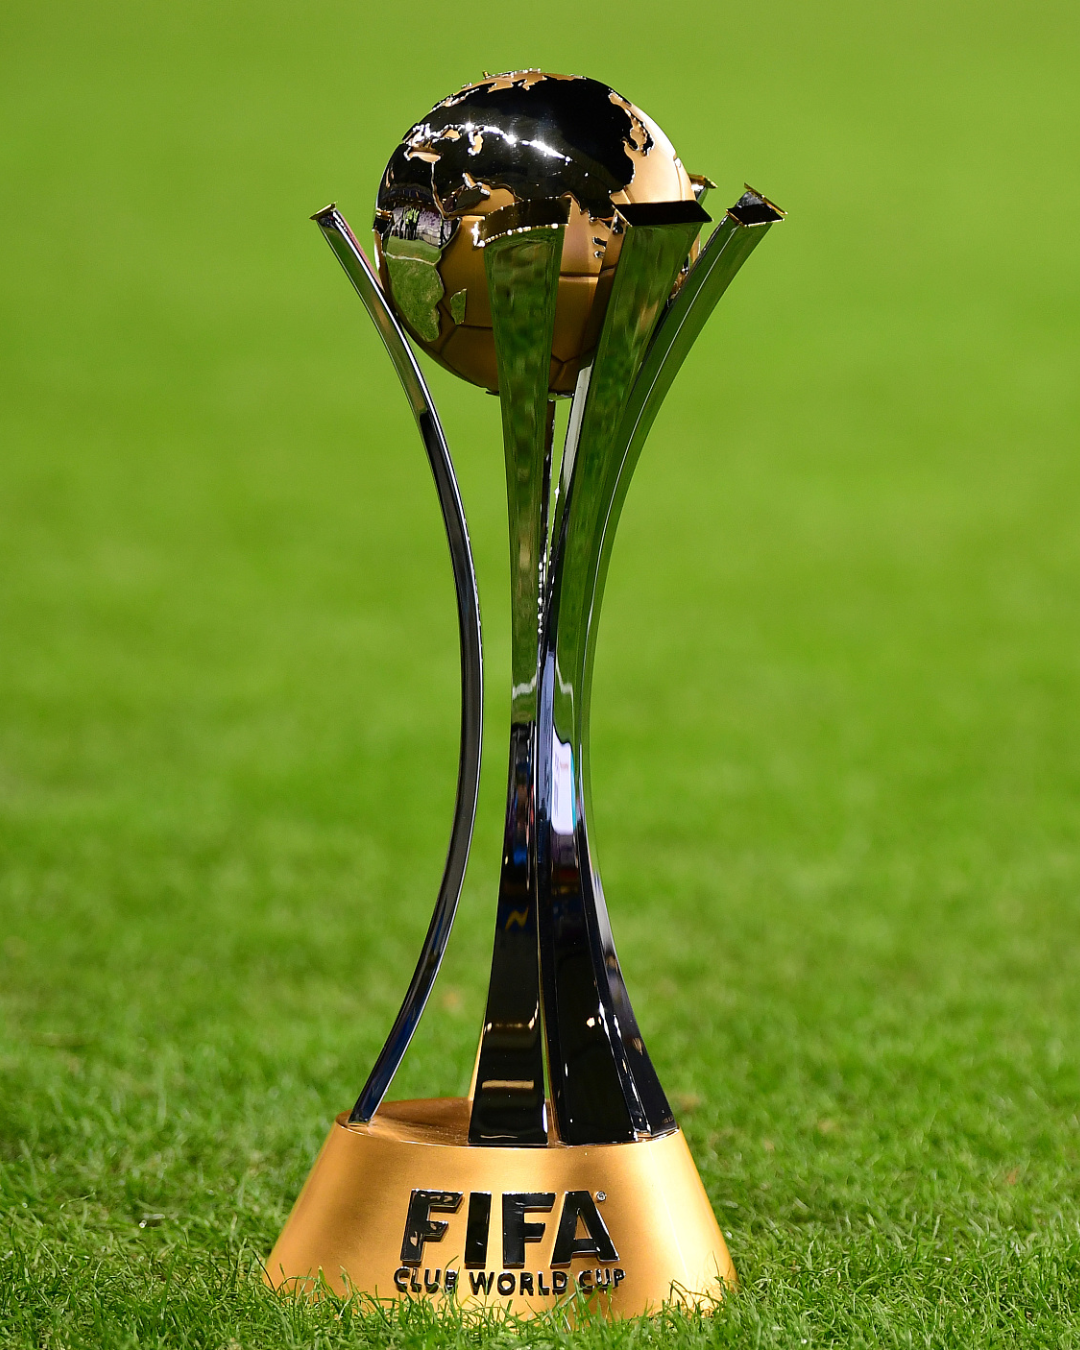 Cronache di Spogliatoio will broadcast the 2023 Club World Cup  Semifinals and final of the tournament scheduled for December broadcast on YouTube